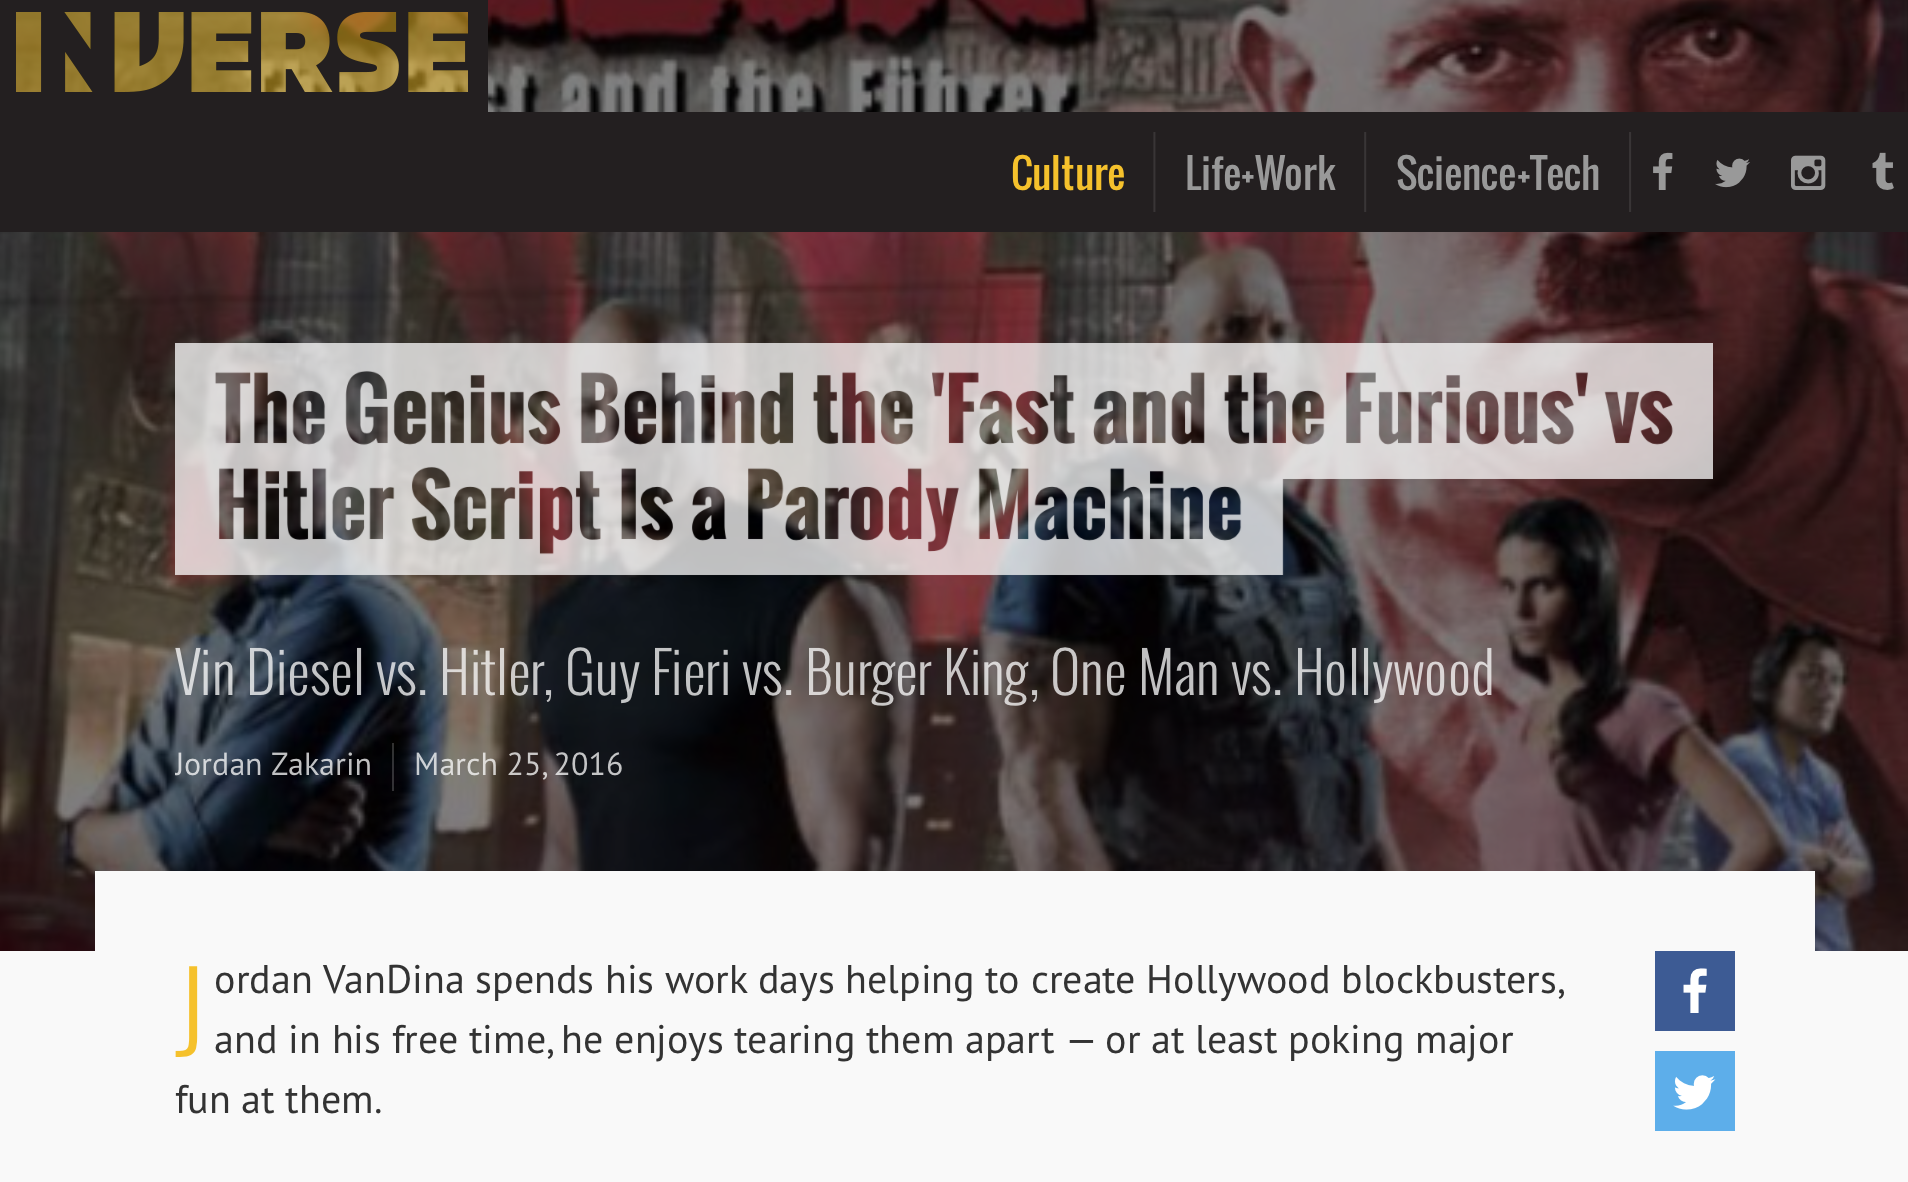 https://www.inverse.com/article/13316-the-genius-behind-the-fast-and-the-furious-vs-hitler-script-is-a-parody-machine